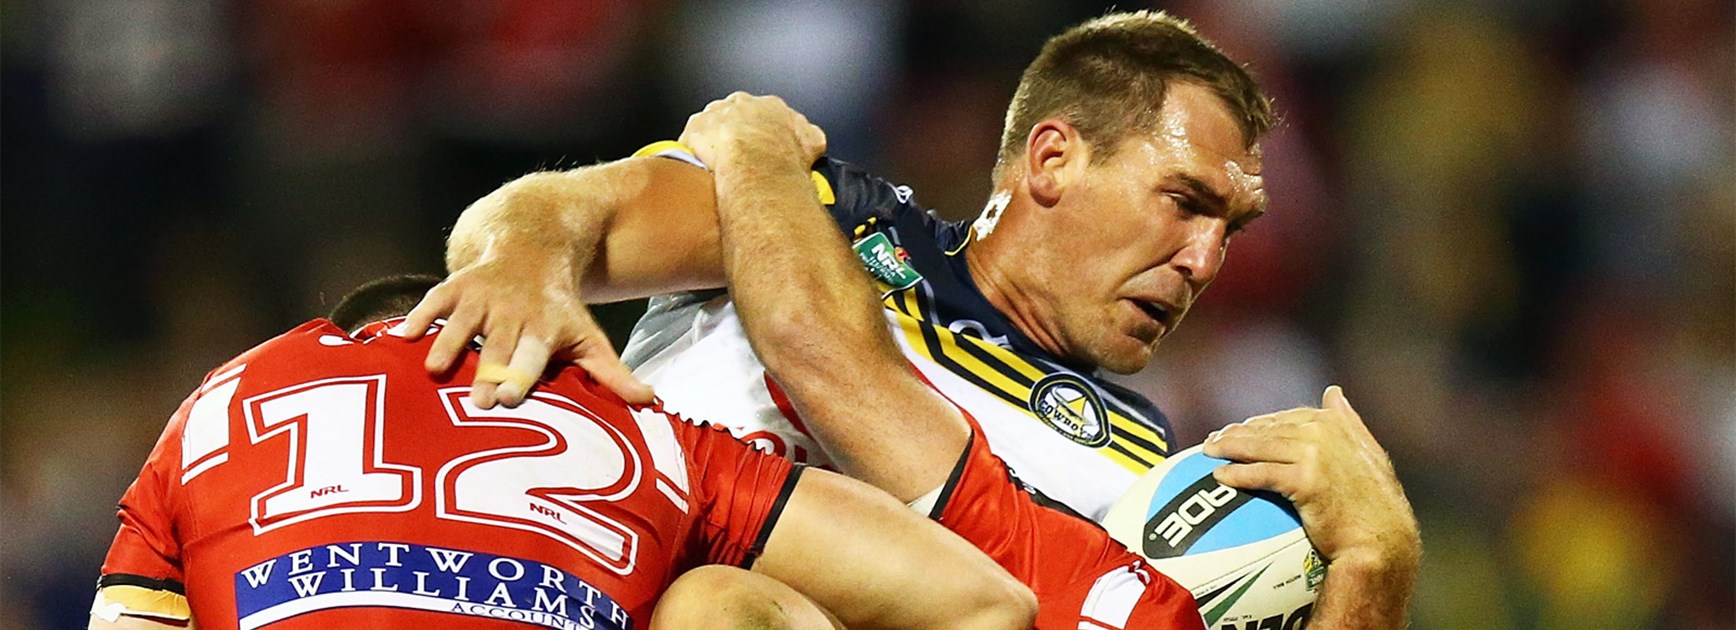 North Queensland's Scott Bolton returned from a fishing injury against the Dragons in Round 17.